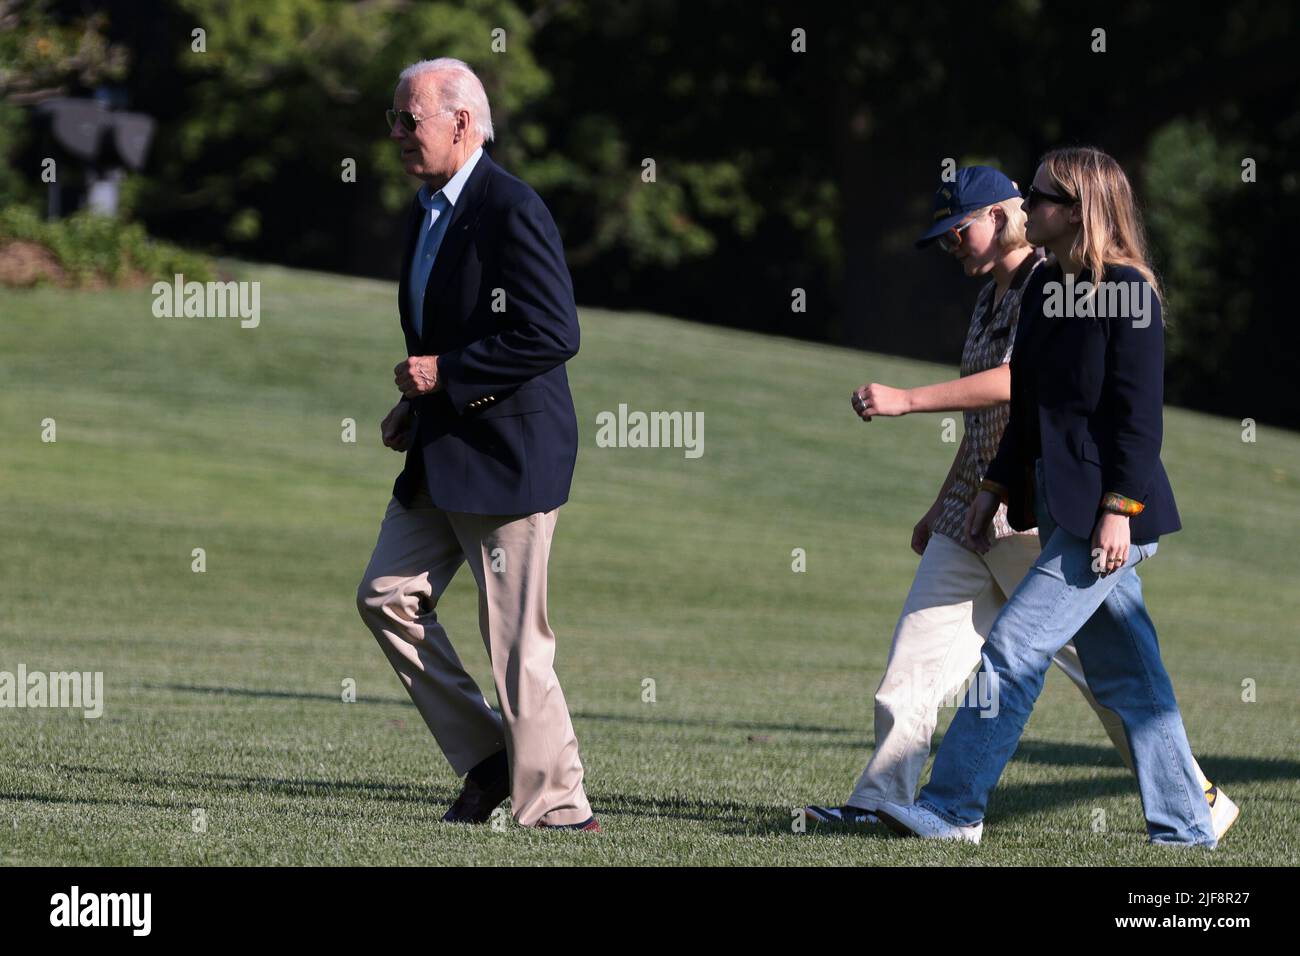 Washington, DC. 30th June, 2022. United States President Joe Biden, arrives on the South Lawn of the White House alongside his 2 granddaughters, Finnegan Biden and Maisy Biden, on June 30, 2022 in Washington, DC. Biden returned to Washington after attending summits in Germany and Spain. Credit: Oliver Contreras/Pool via CNP/dpa/Alamy Live News Stock Photo